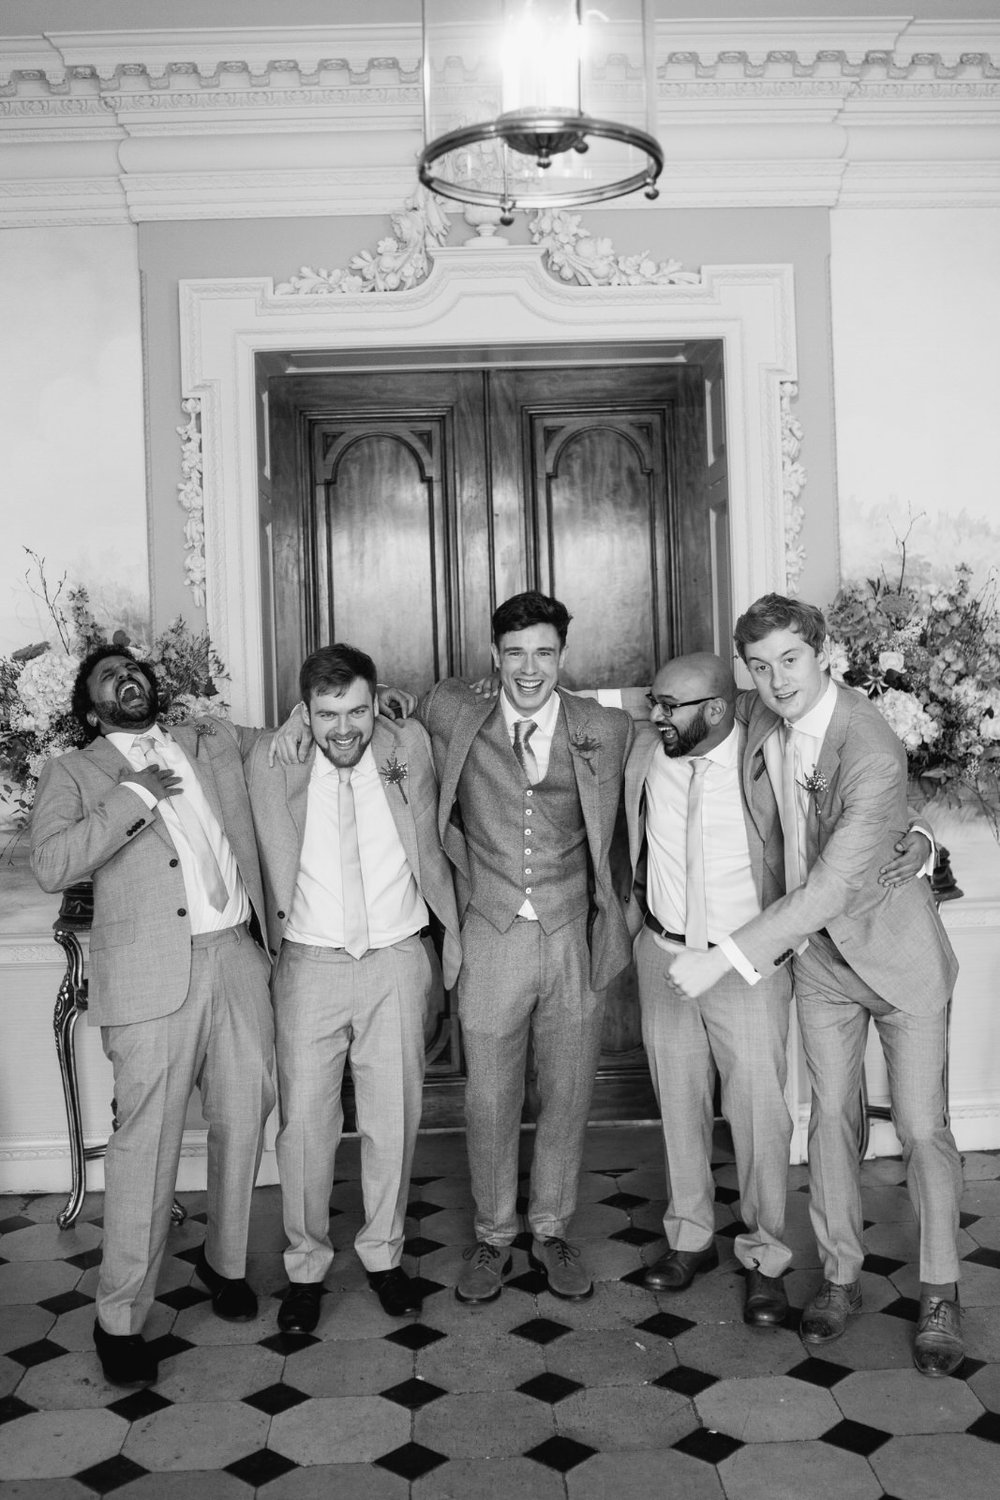 Ed Gamble, groom, stands with his groomsmen in wedding photograph taken at Hedsor House